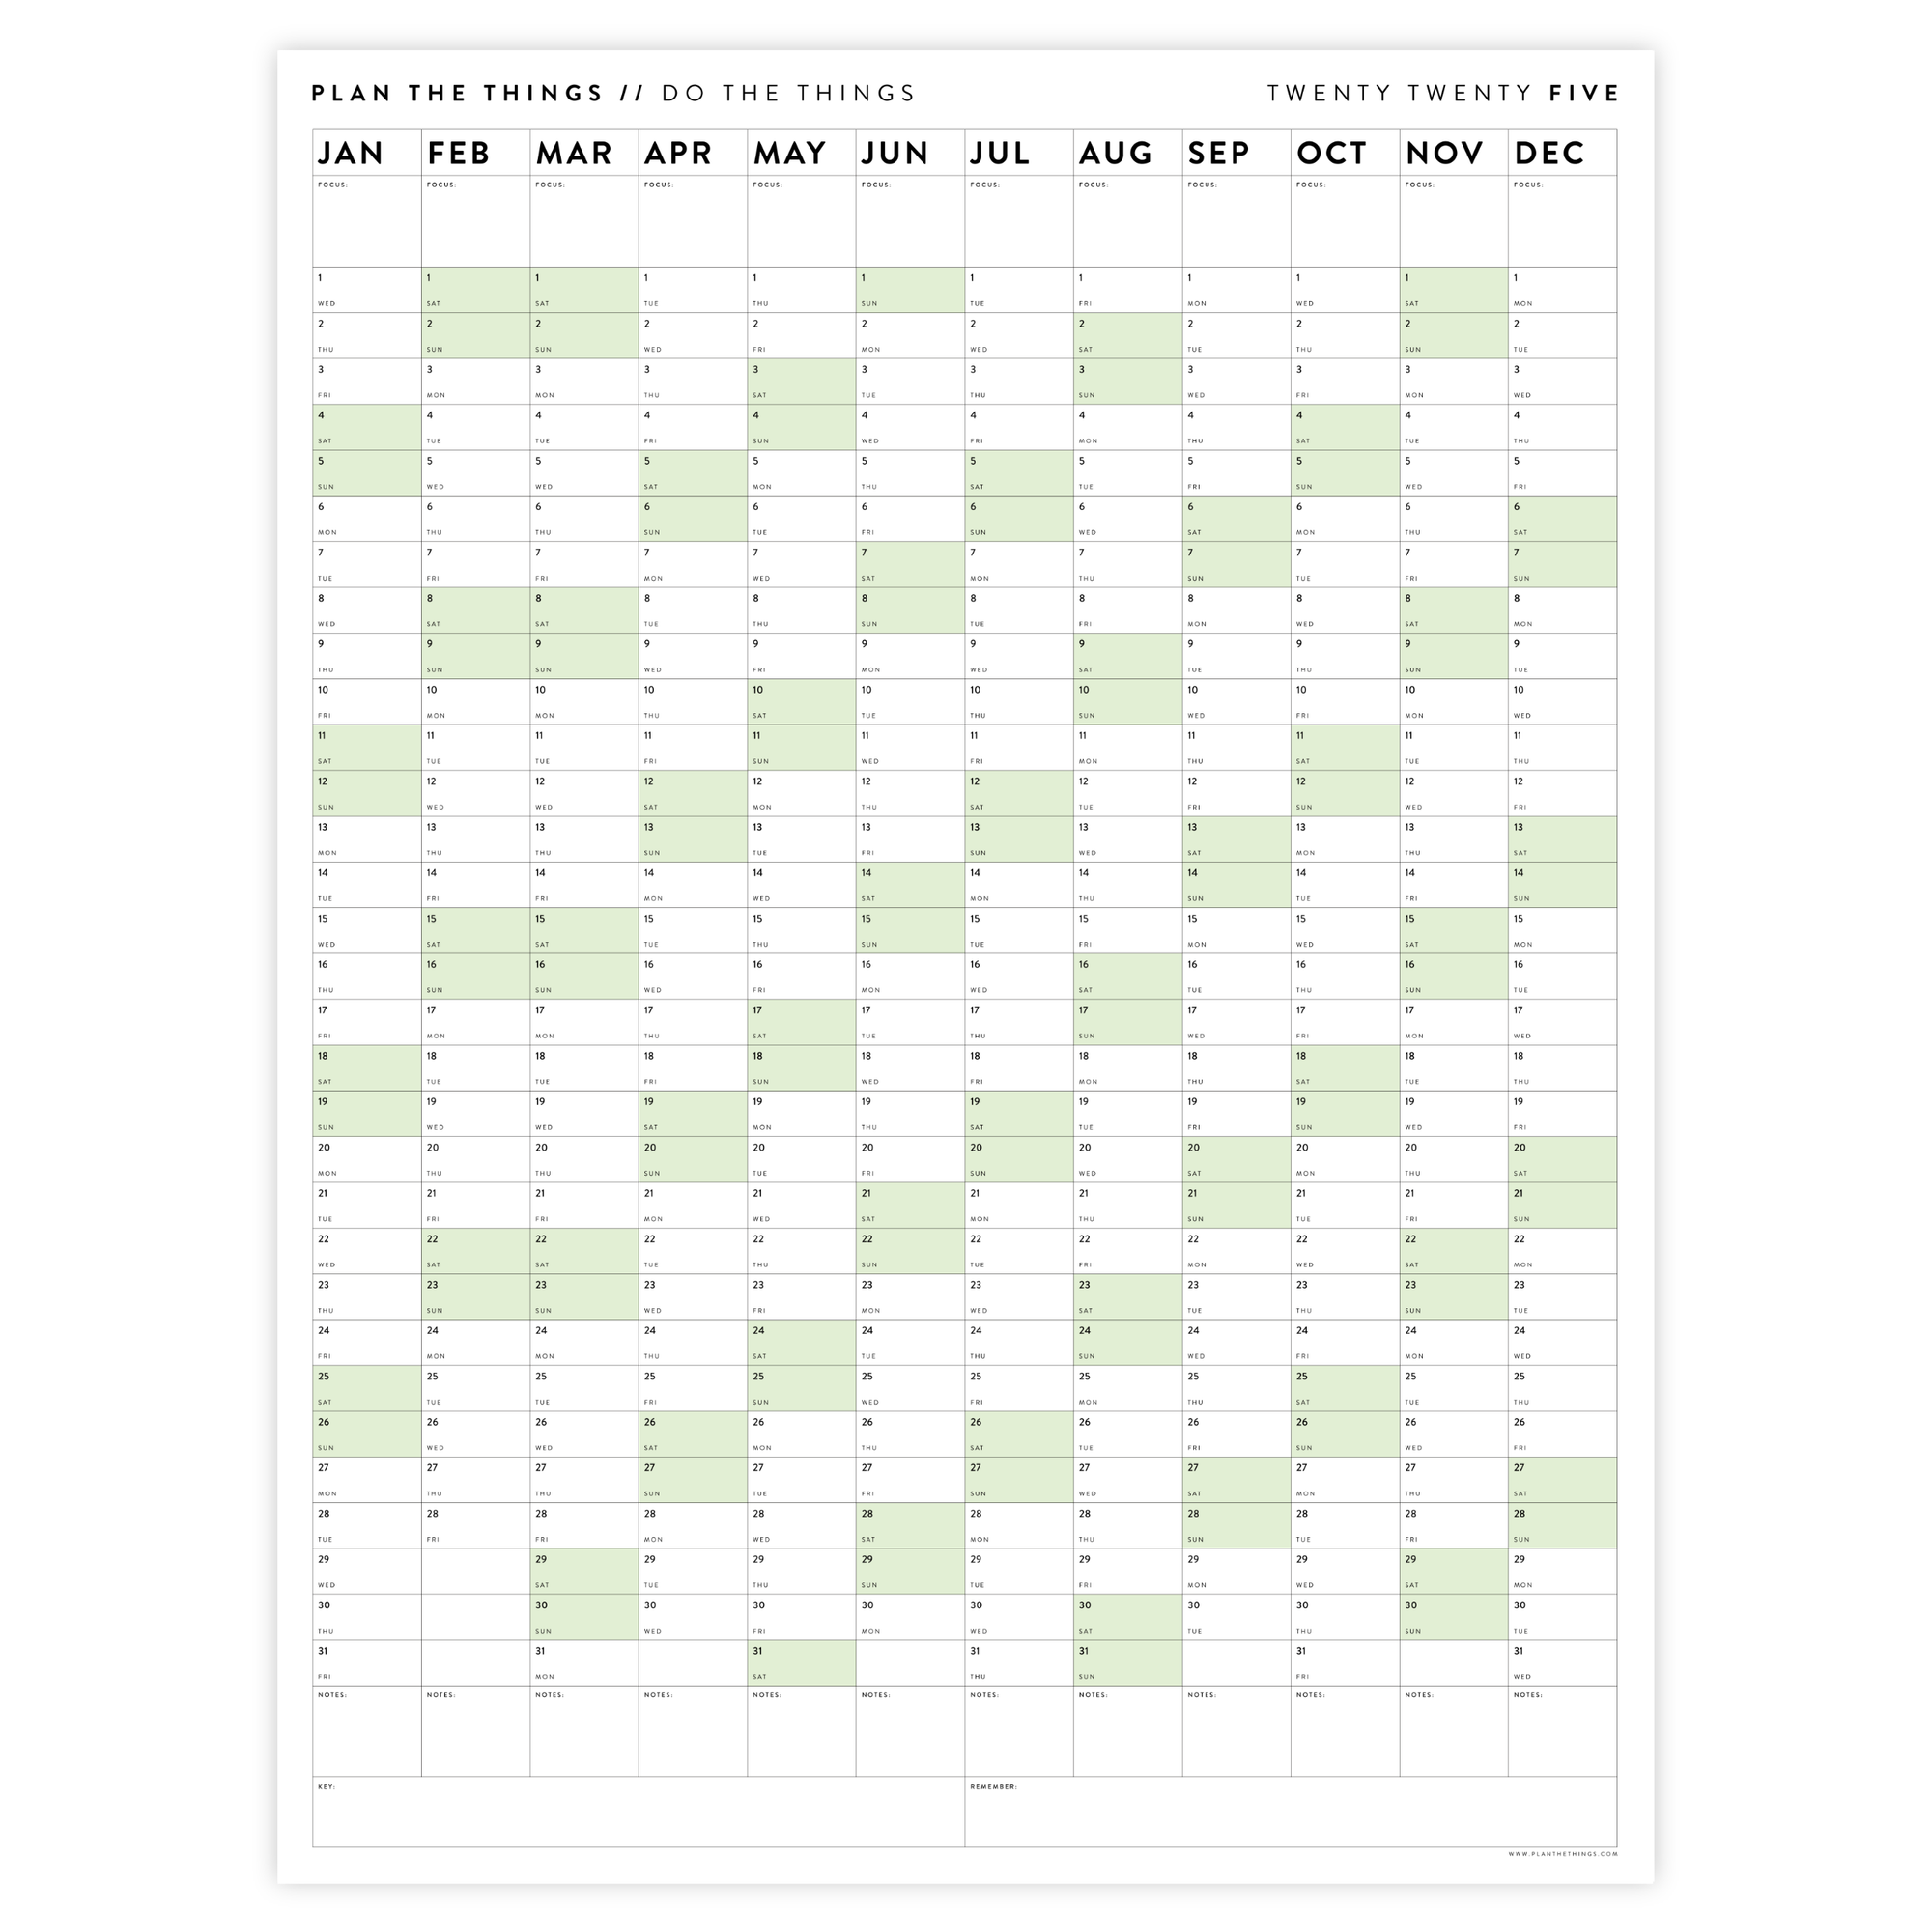 PRINTABLE VERTICAL 2025 WALL CALENDAR WITH GREEN WEEKENDS - INSTANT DOWNLOAD